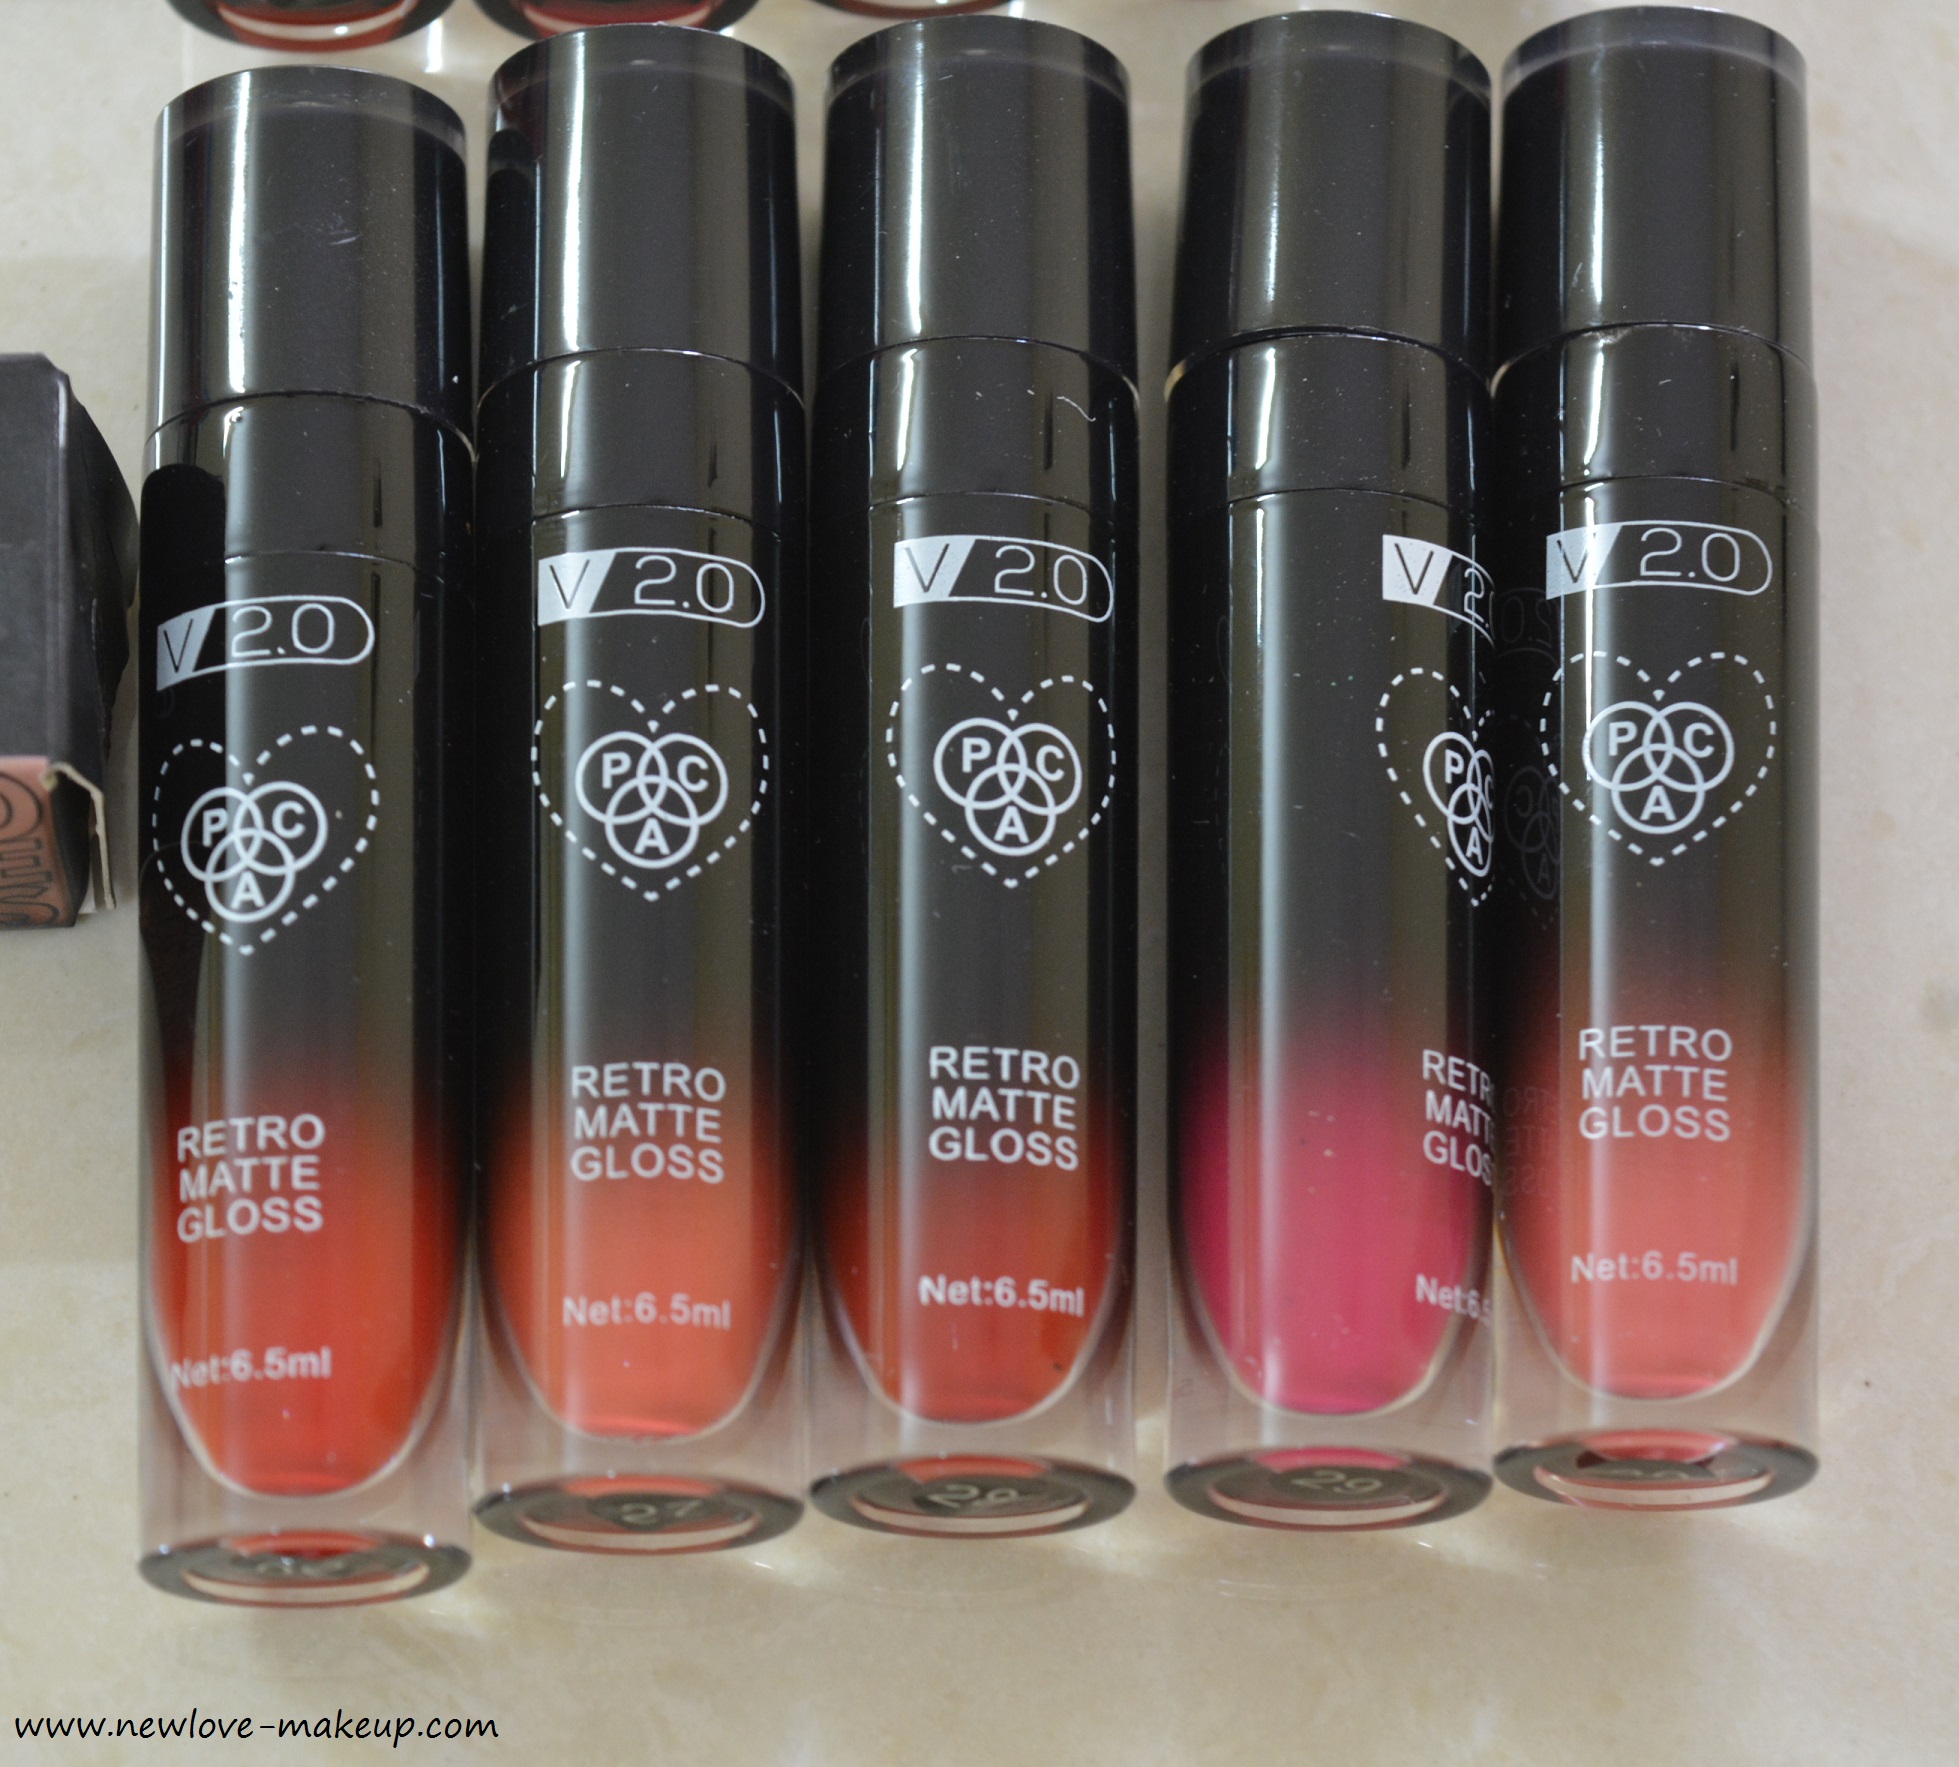 PAC Retro Matte Gloss V2.0 Shades 21 to 40 Review, Swatches